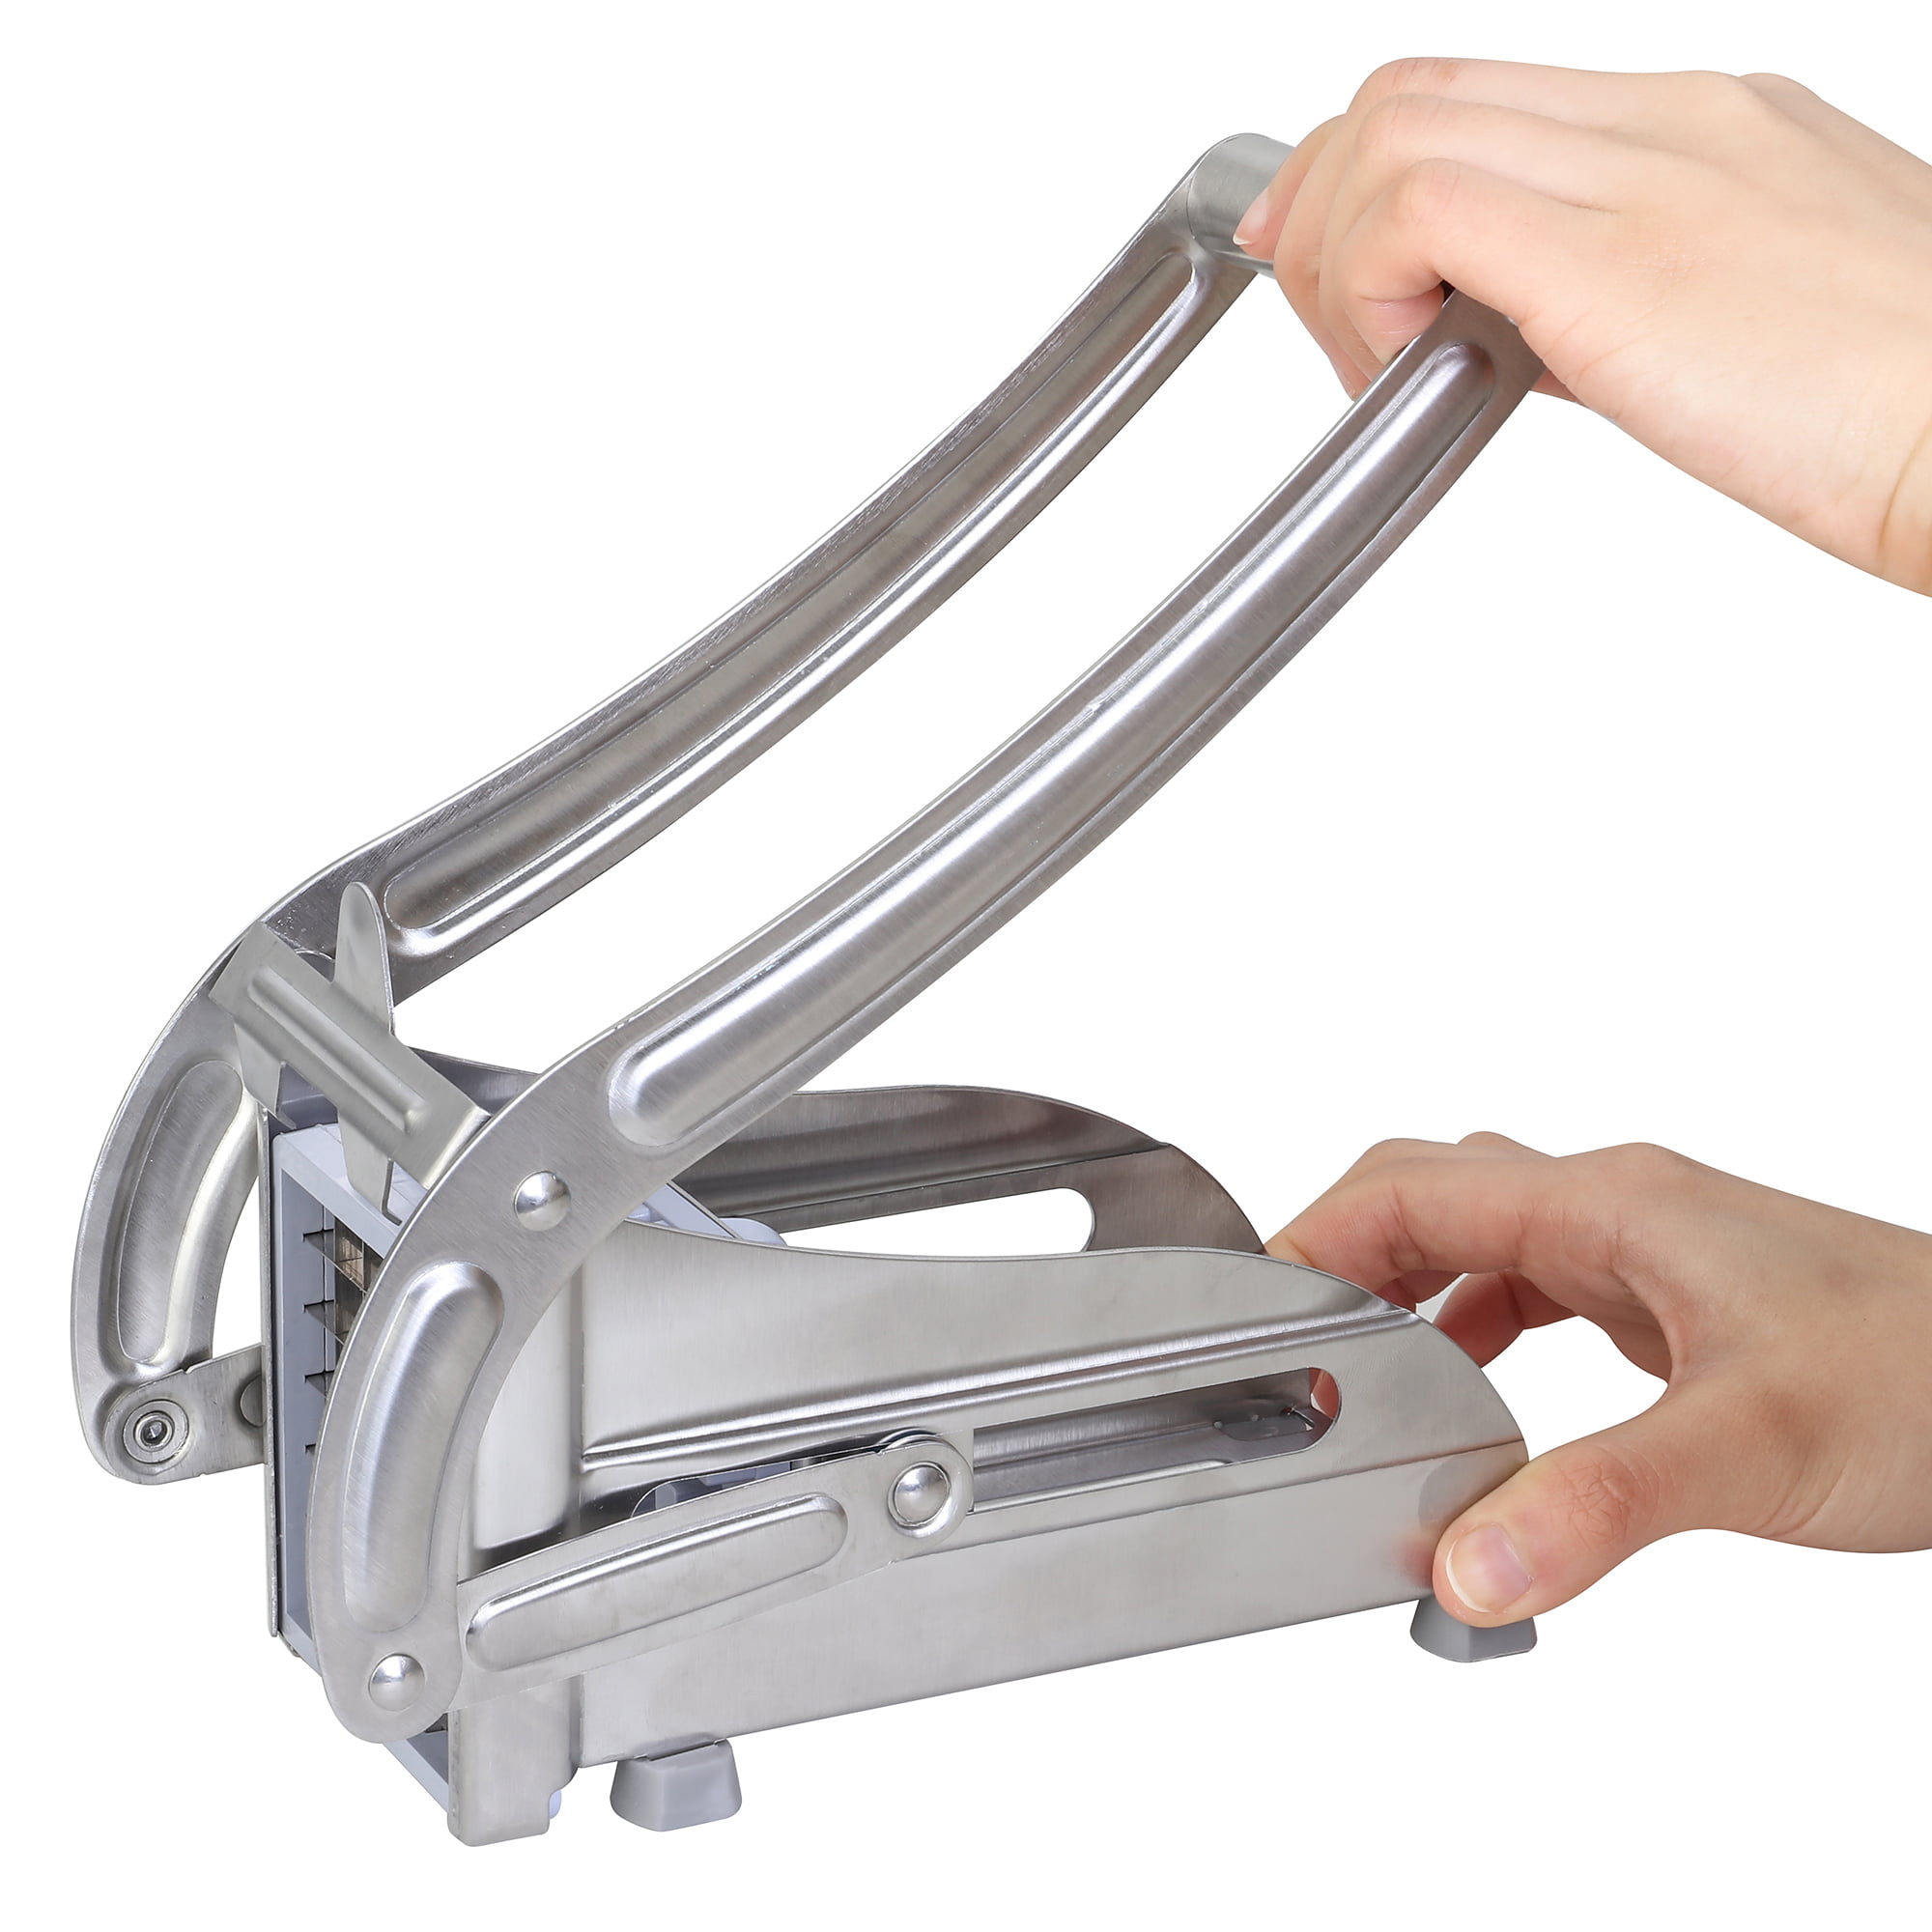  French Fry Cutter Potato Slicer LSOFNRB Stainless Steel Potato  Cutter, French Fries Cutter Includes 2 Blade Size and No-Slip Suction Base,  Easy to Clean, For Air Fryer Food, Vegetable Cutter: Home